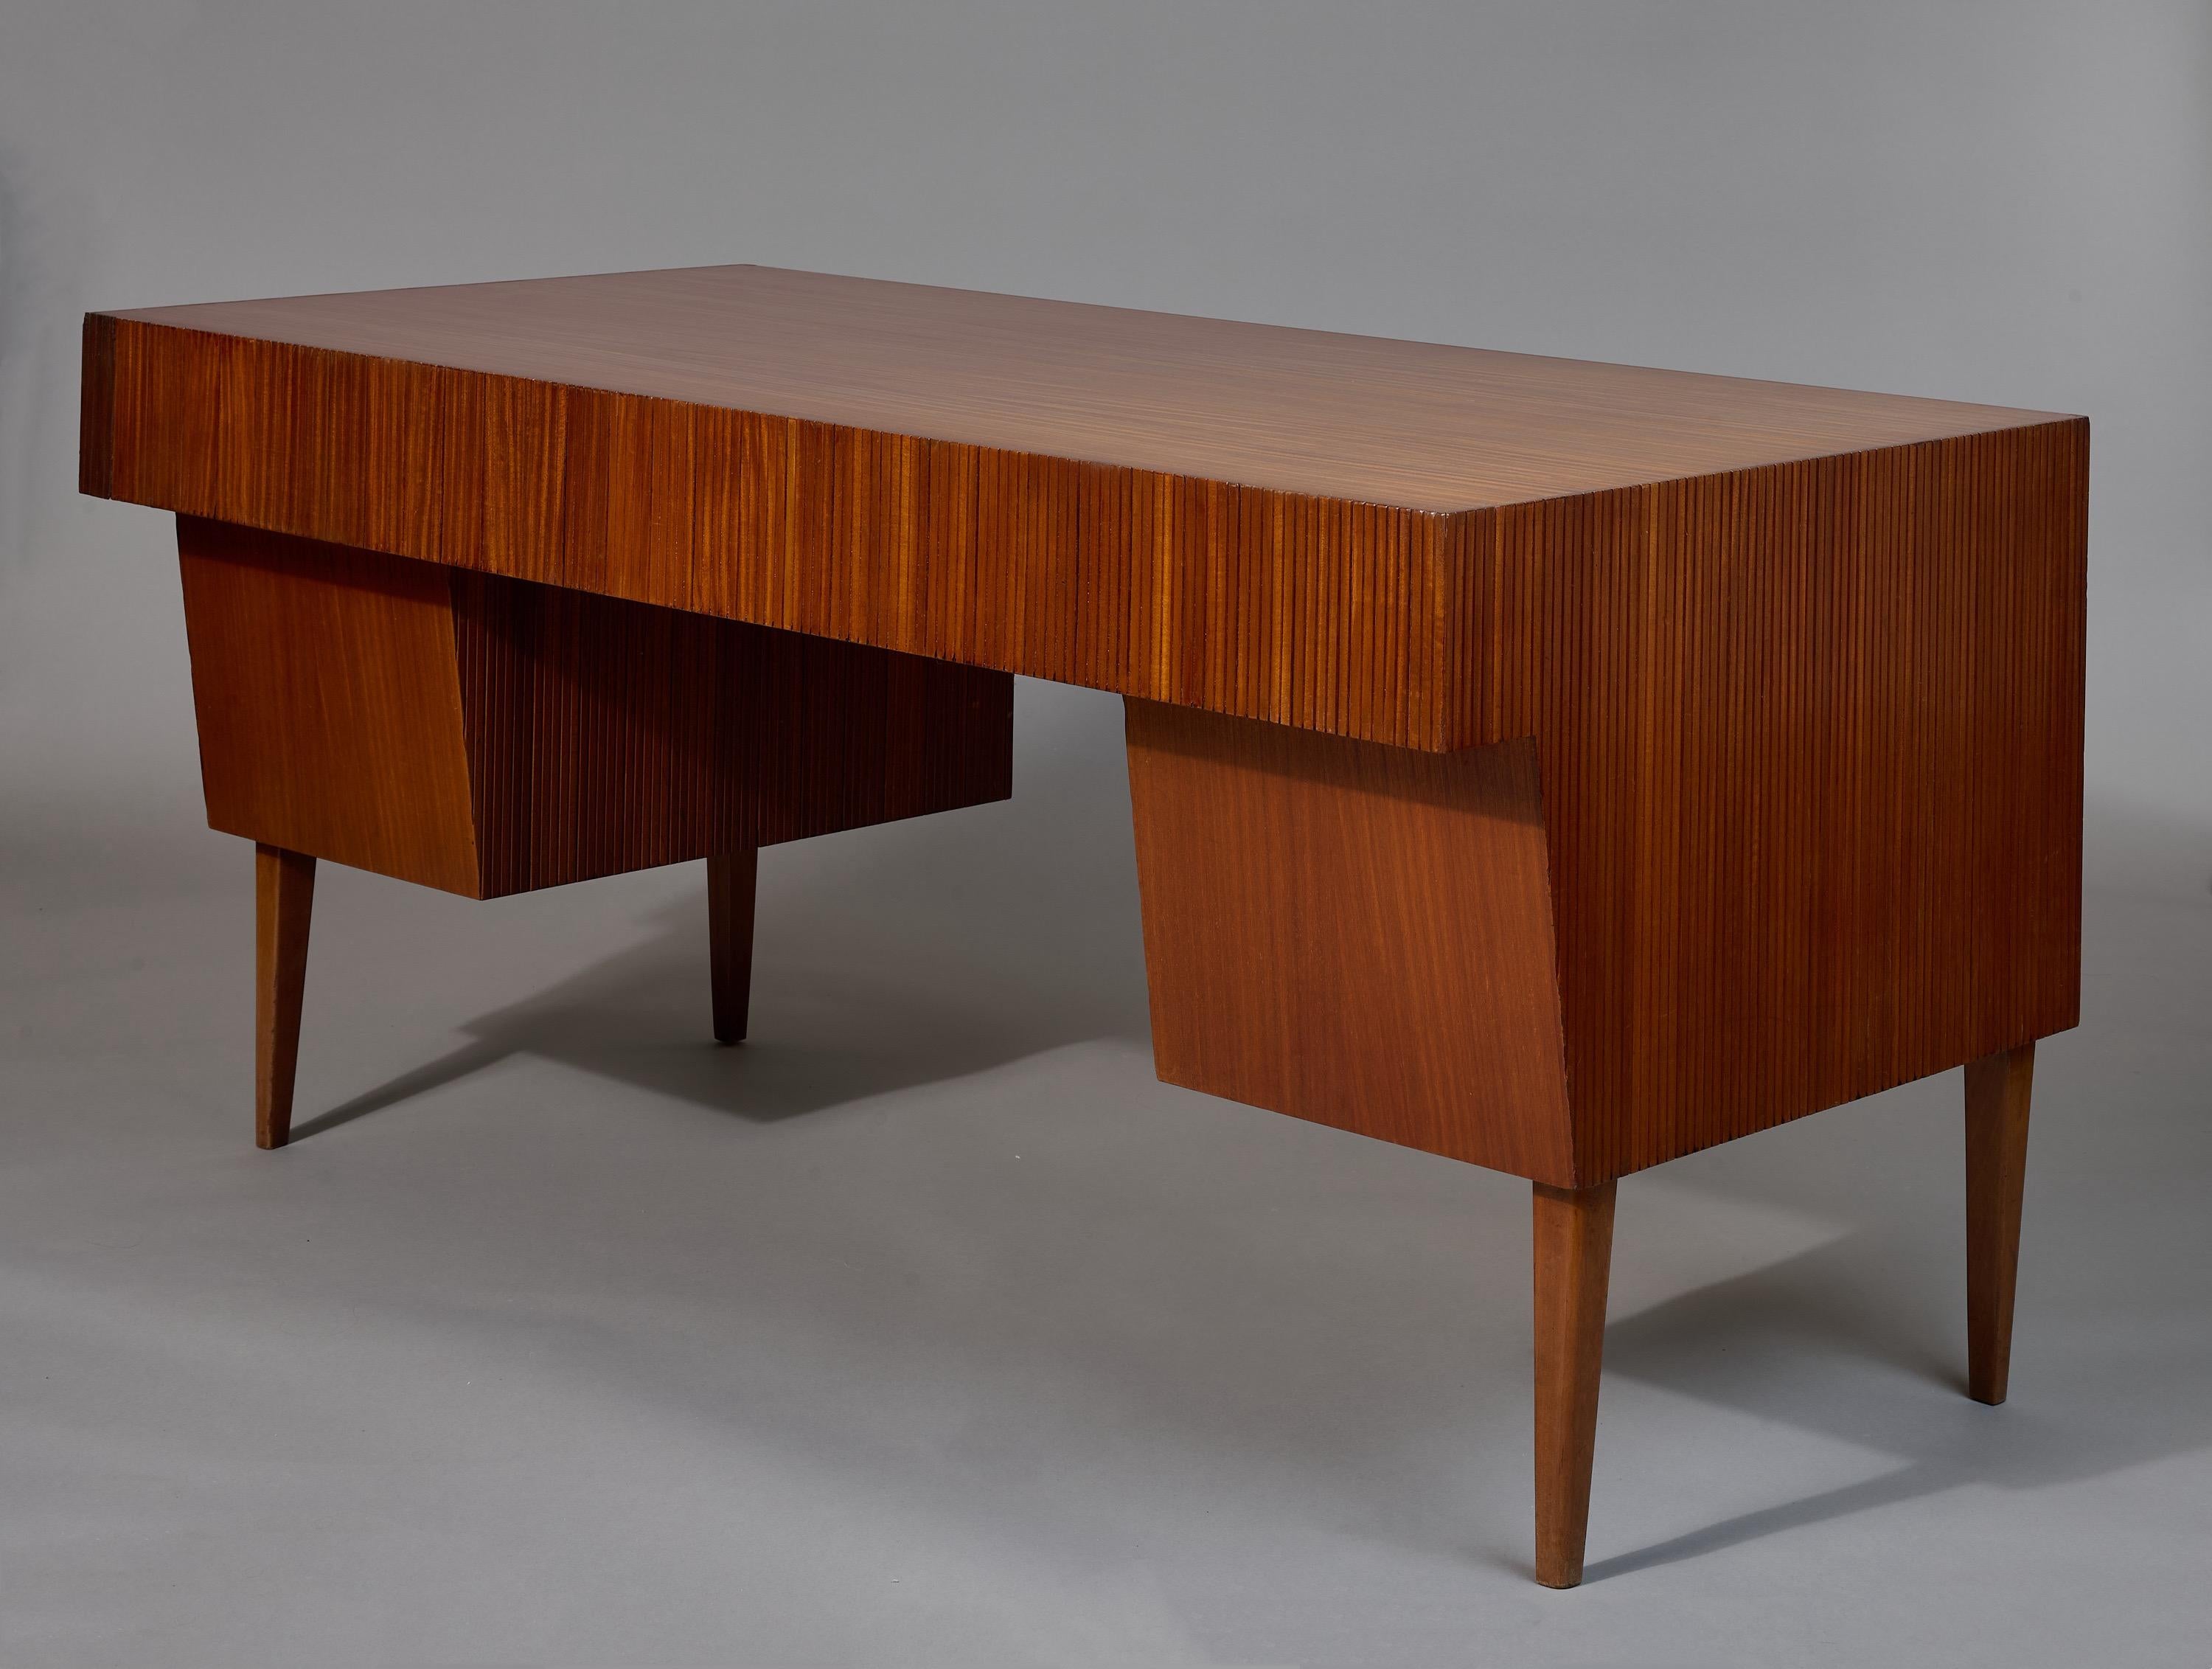 Mid-20th Century Gio Ponti: Monumental Executive Desk in Reeded Walnut and Brass, Italy 1950s For Sale